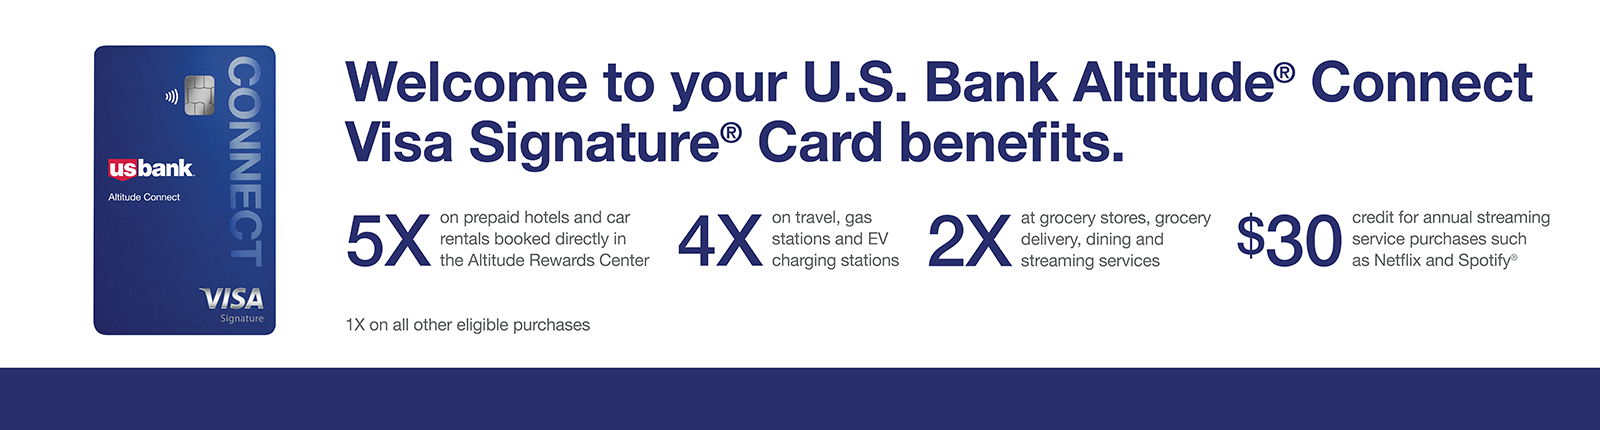 Welcome to your U.S. Bank Altitude Connect Visa Signature Card benefits